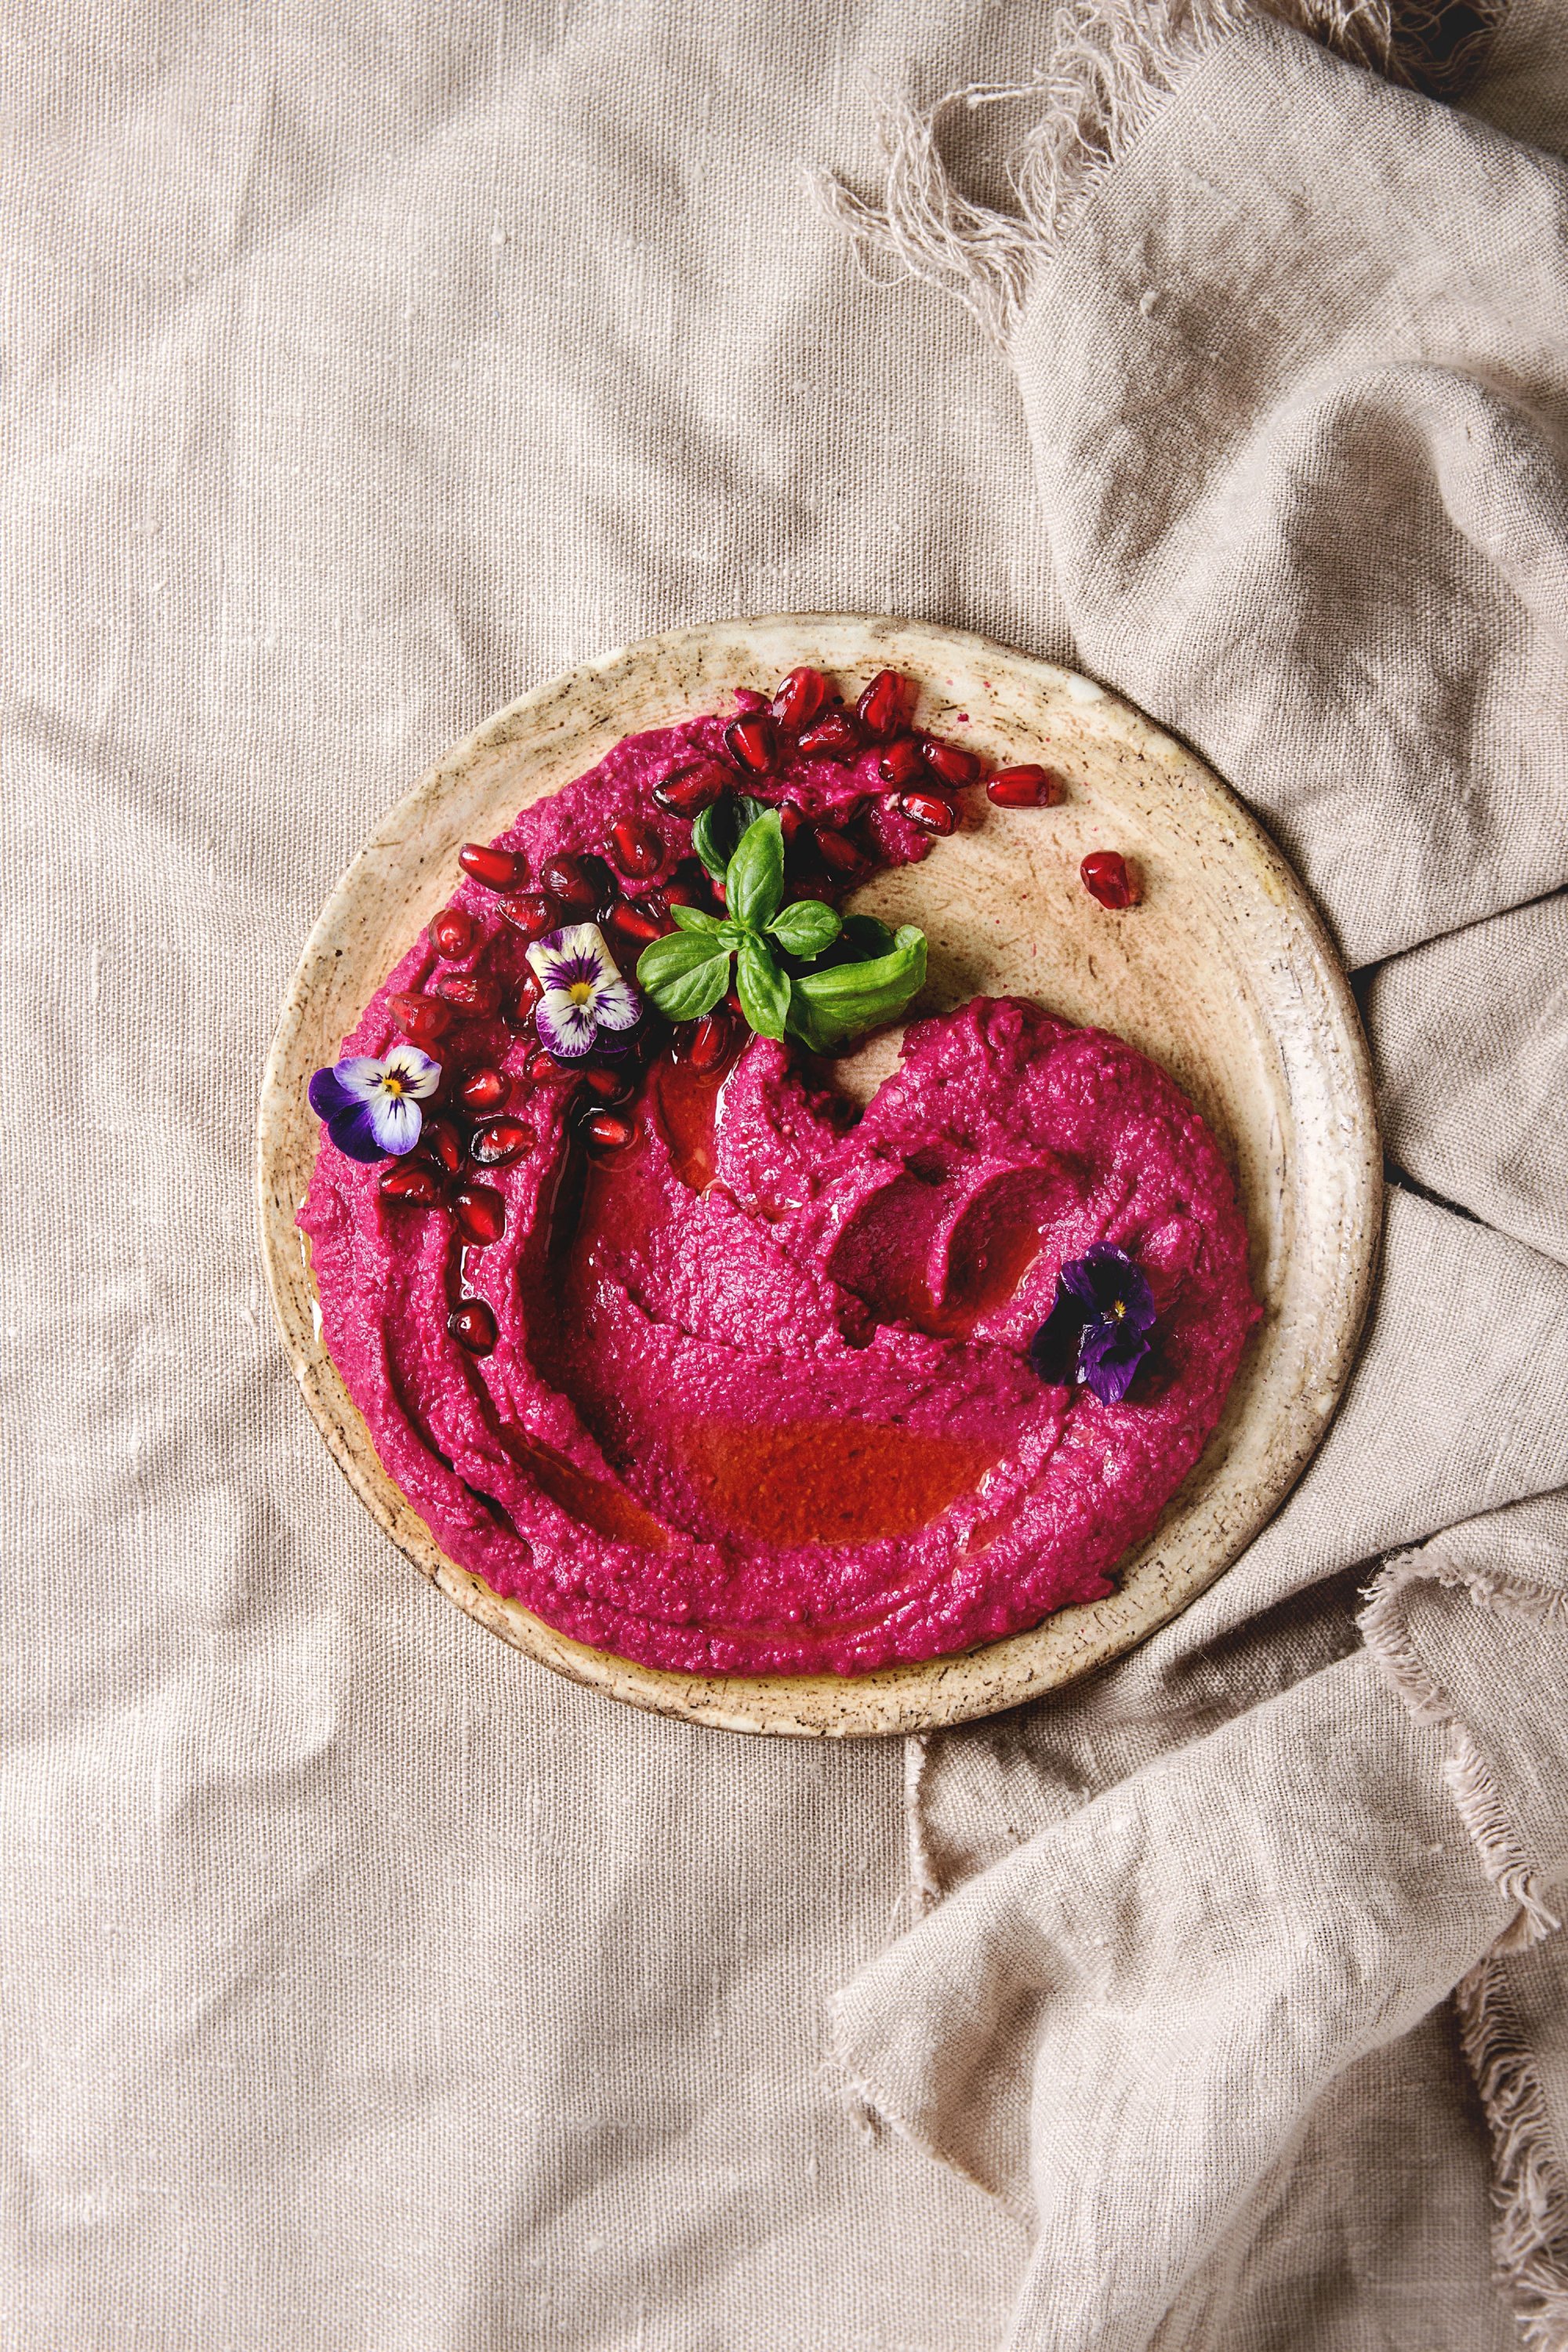 Homemade beetroot hummus can be topped off with pomegranate seeds, olive oil and basil. (Universal Images Group via Getty Images)